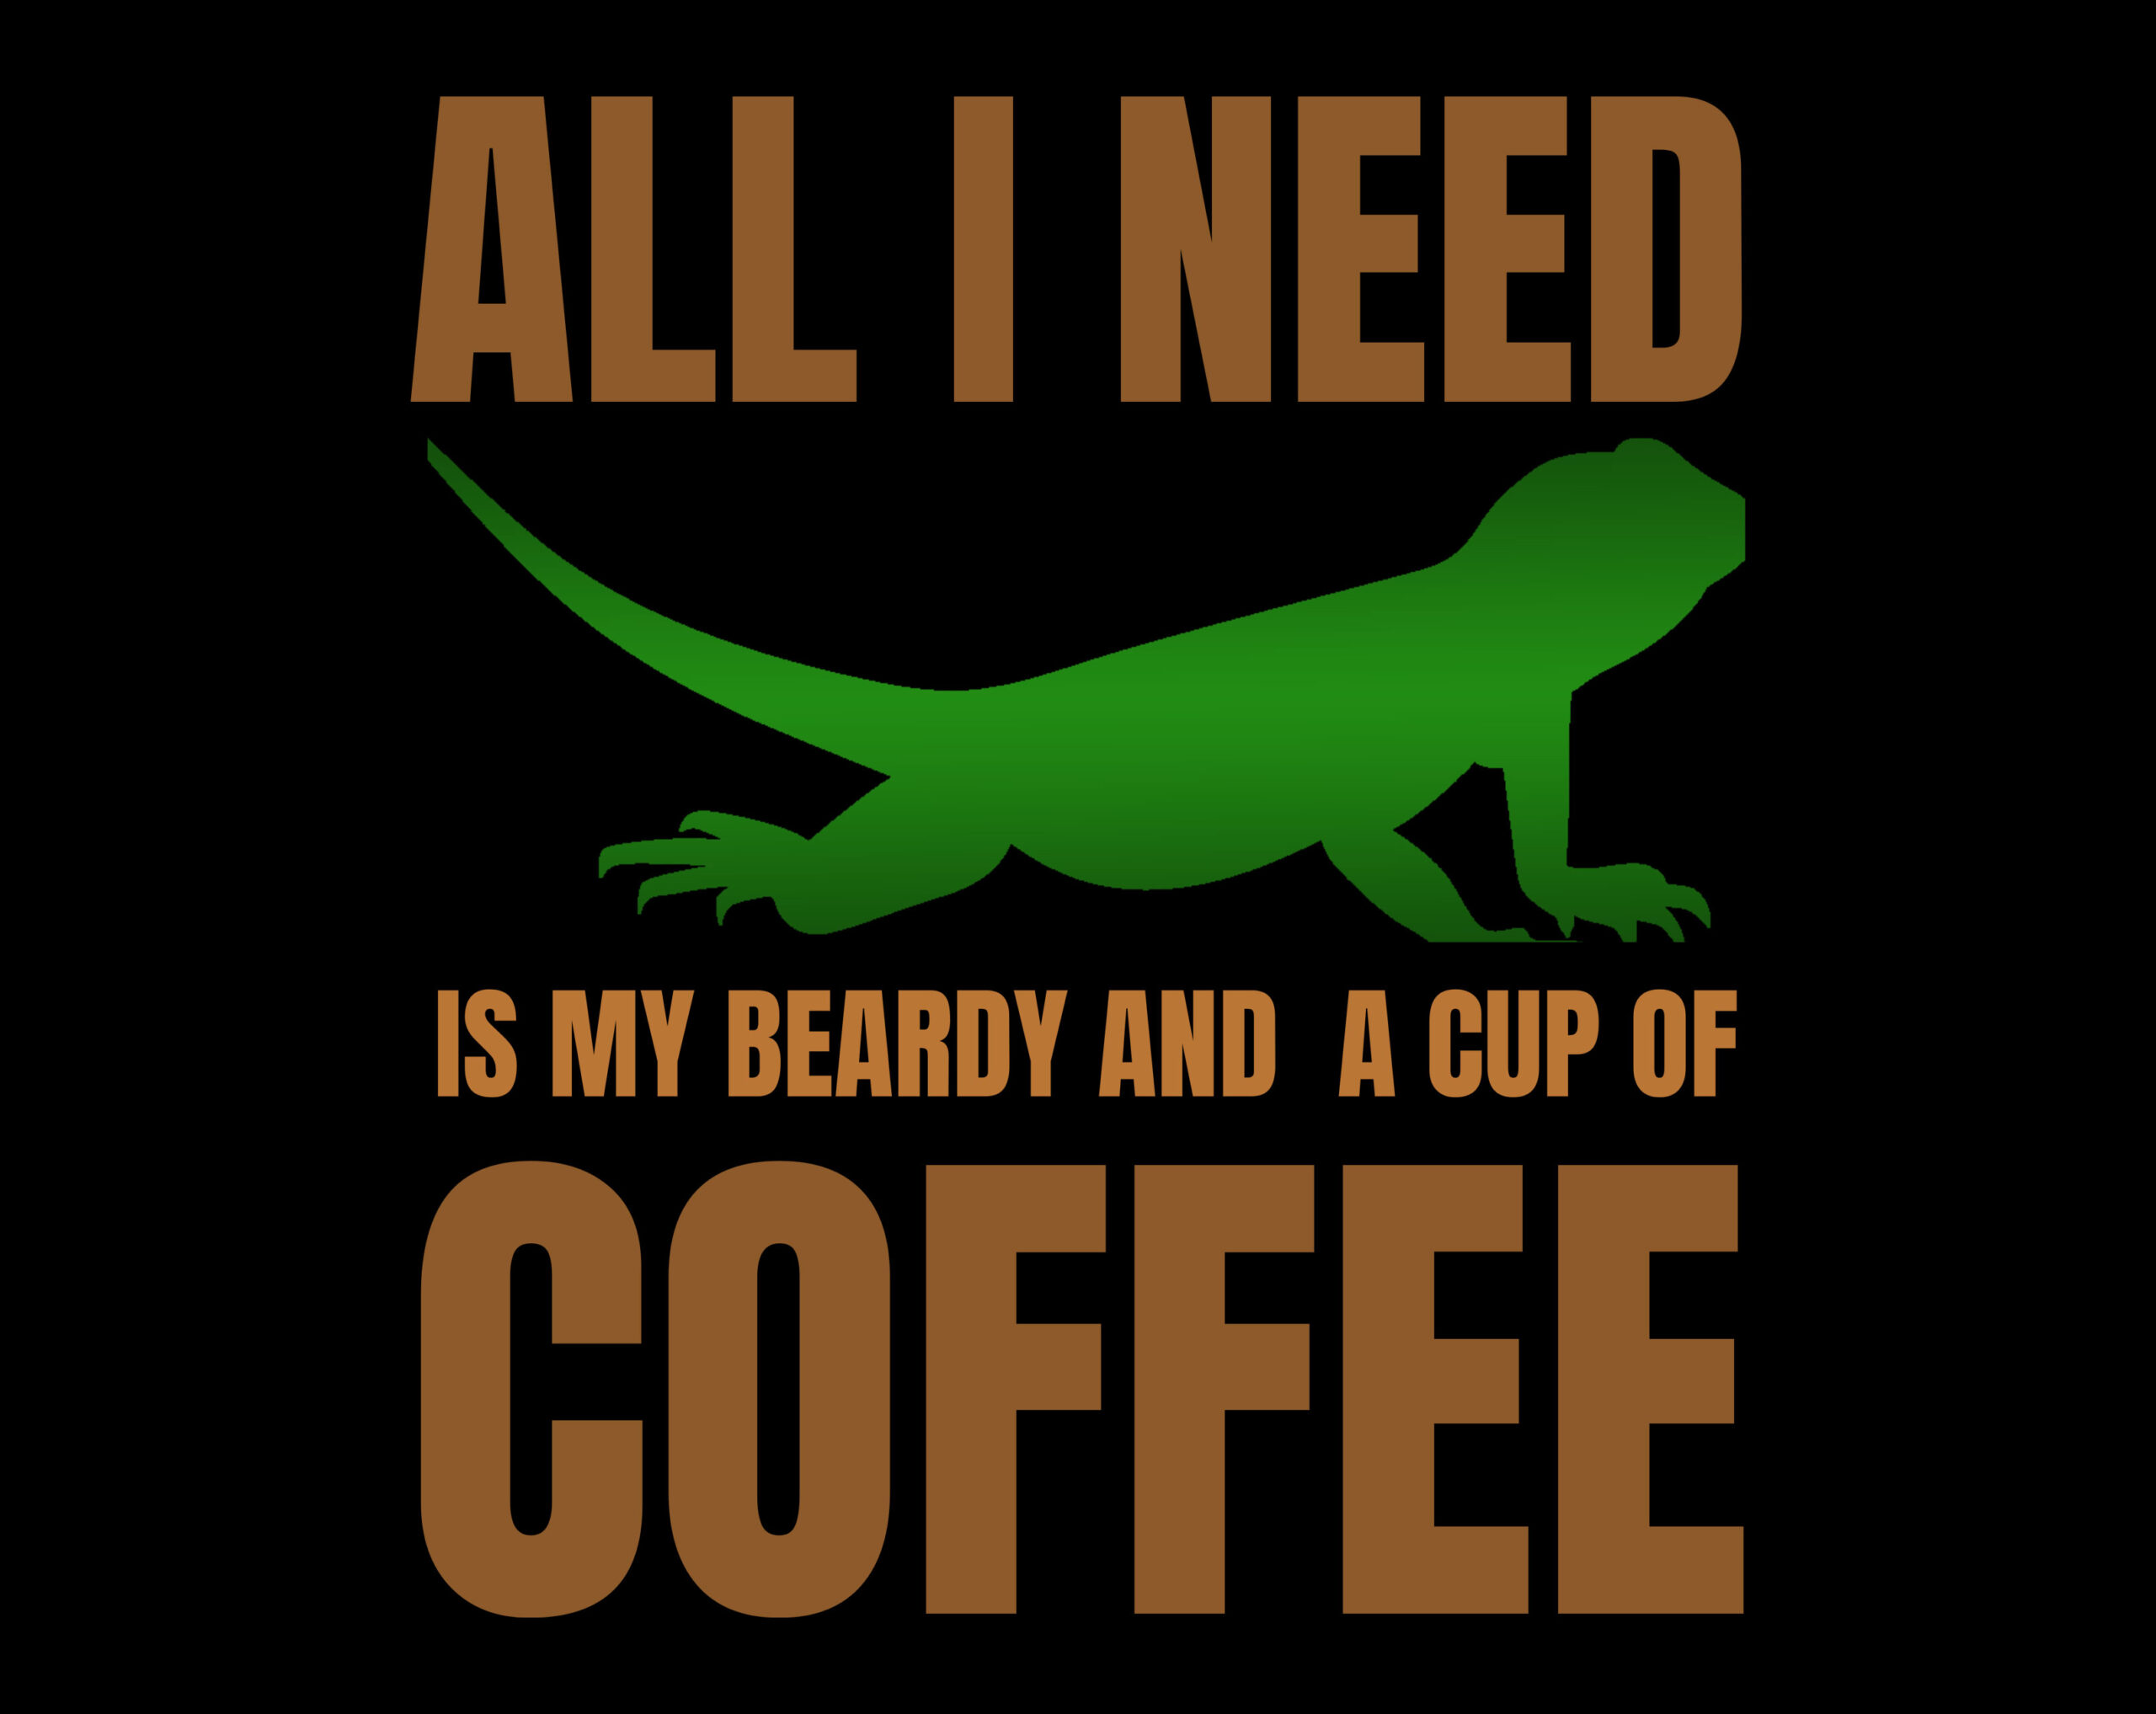 All I need is My Beardy and a Cup of Coffee Shirt